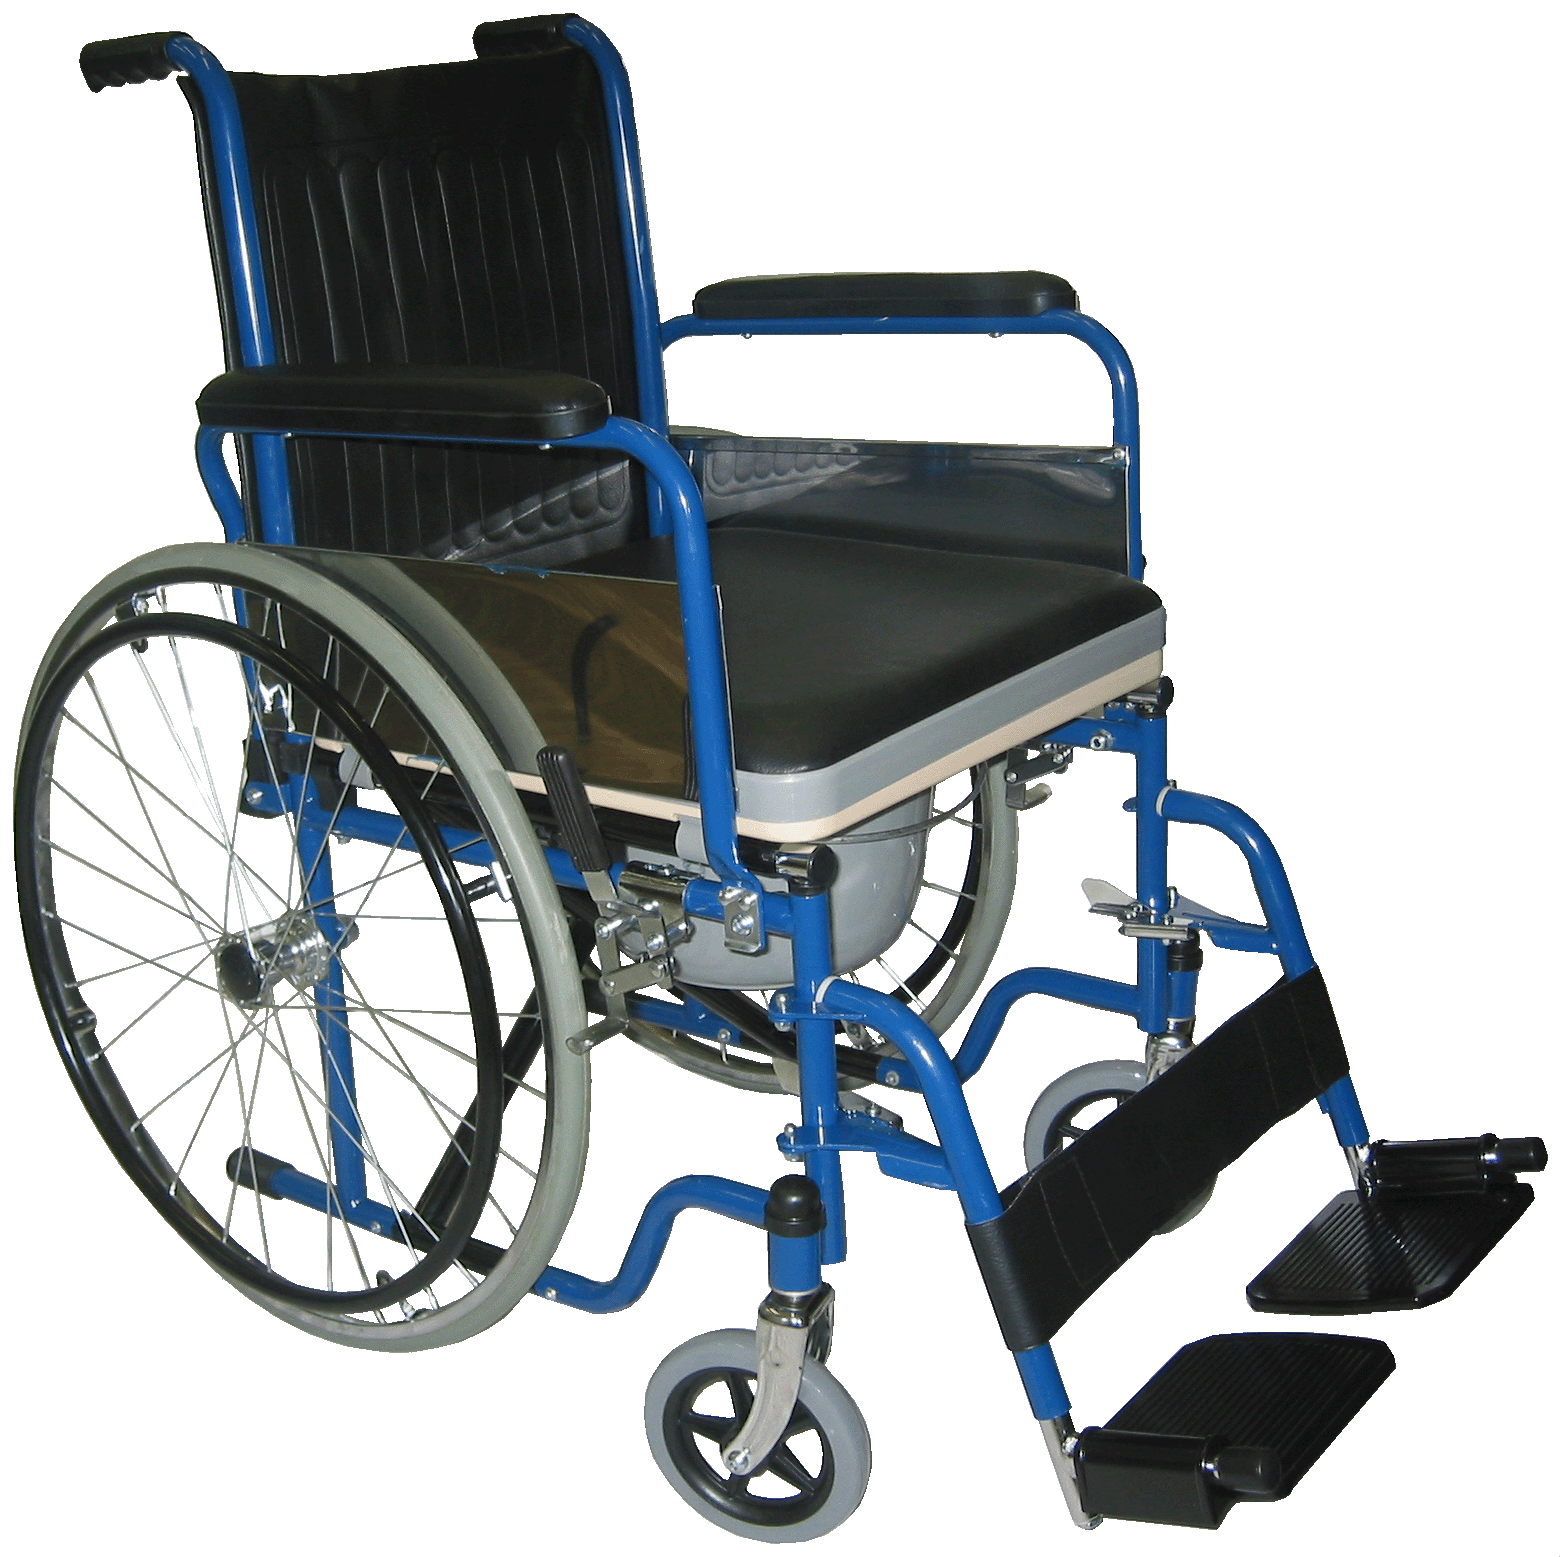 Blue Wheelchair PNG Image